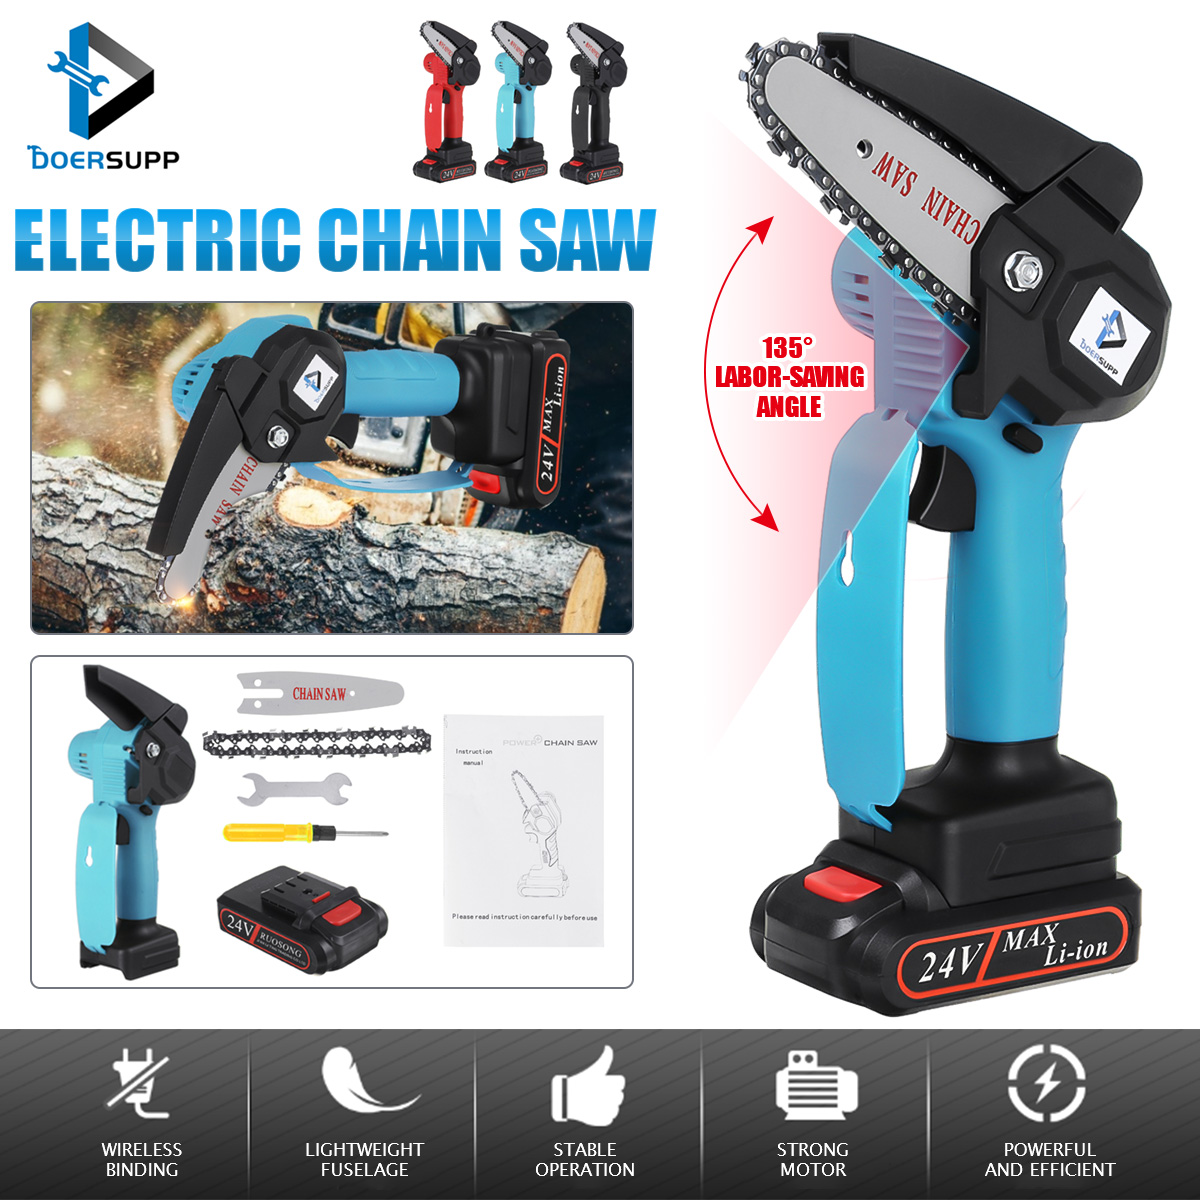 1000W-4Inch-Cordless-Electric-Chain-Saw-Wood-Mini-Cutter-One-Hand-Saw-Woodworking-Tool-W-None1pc-Bat-1833244-2